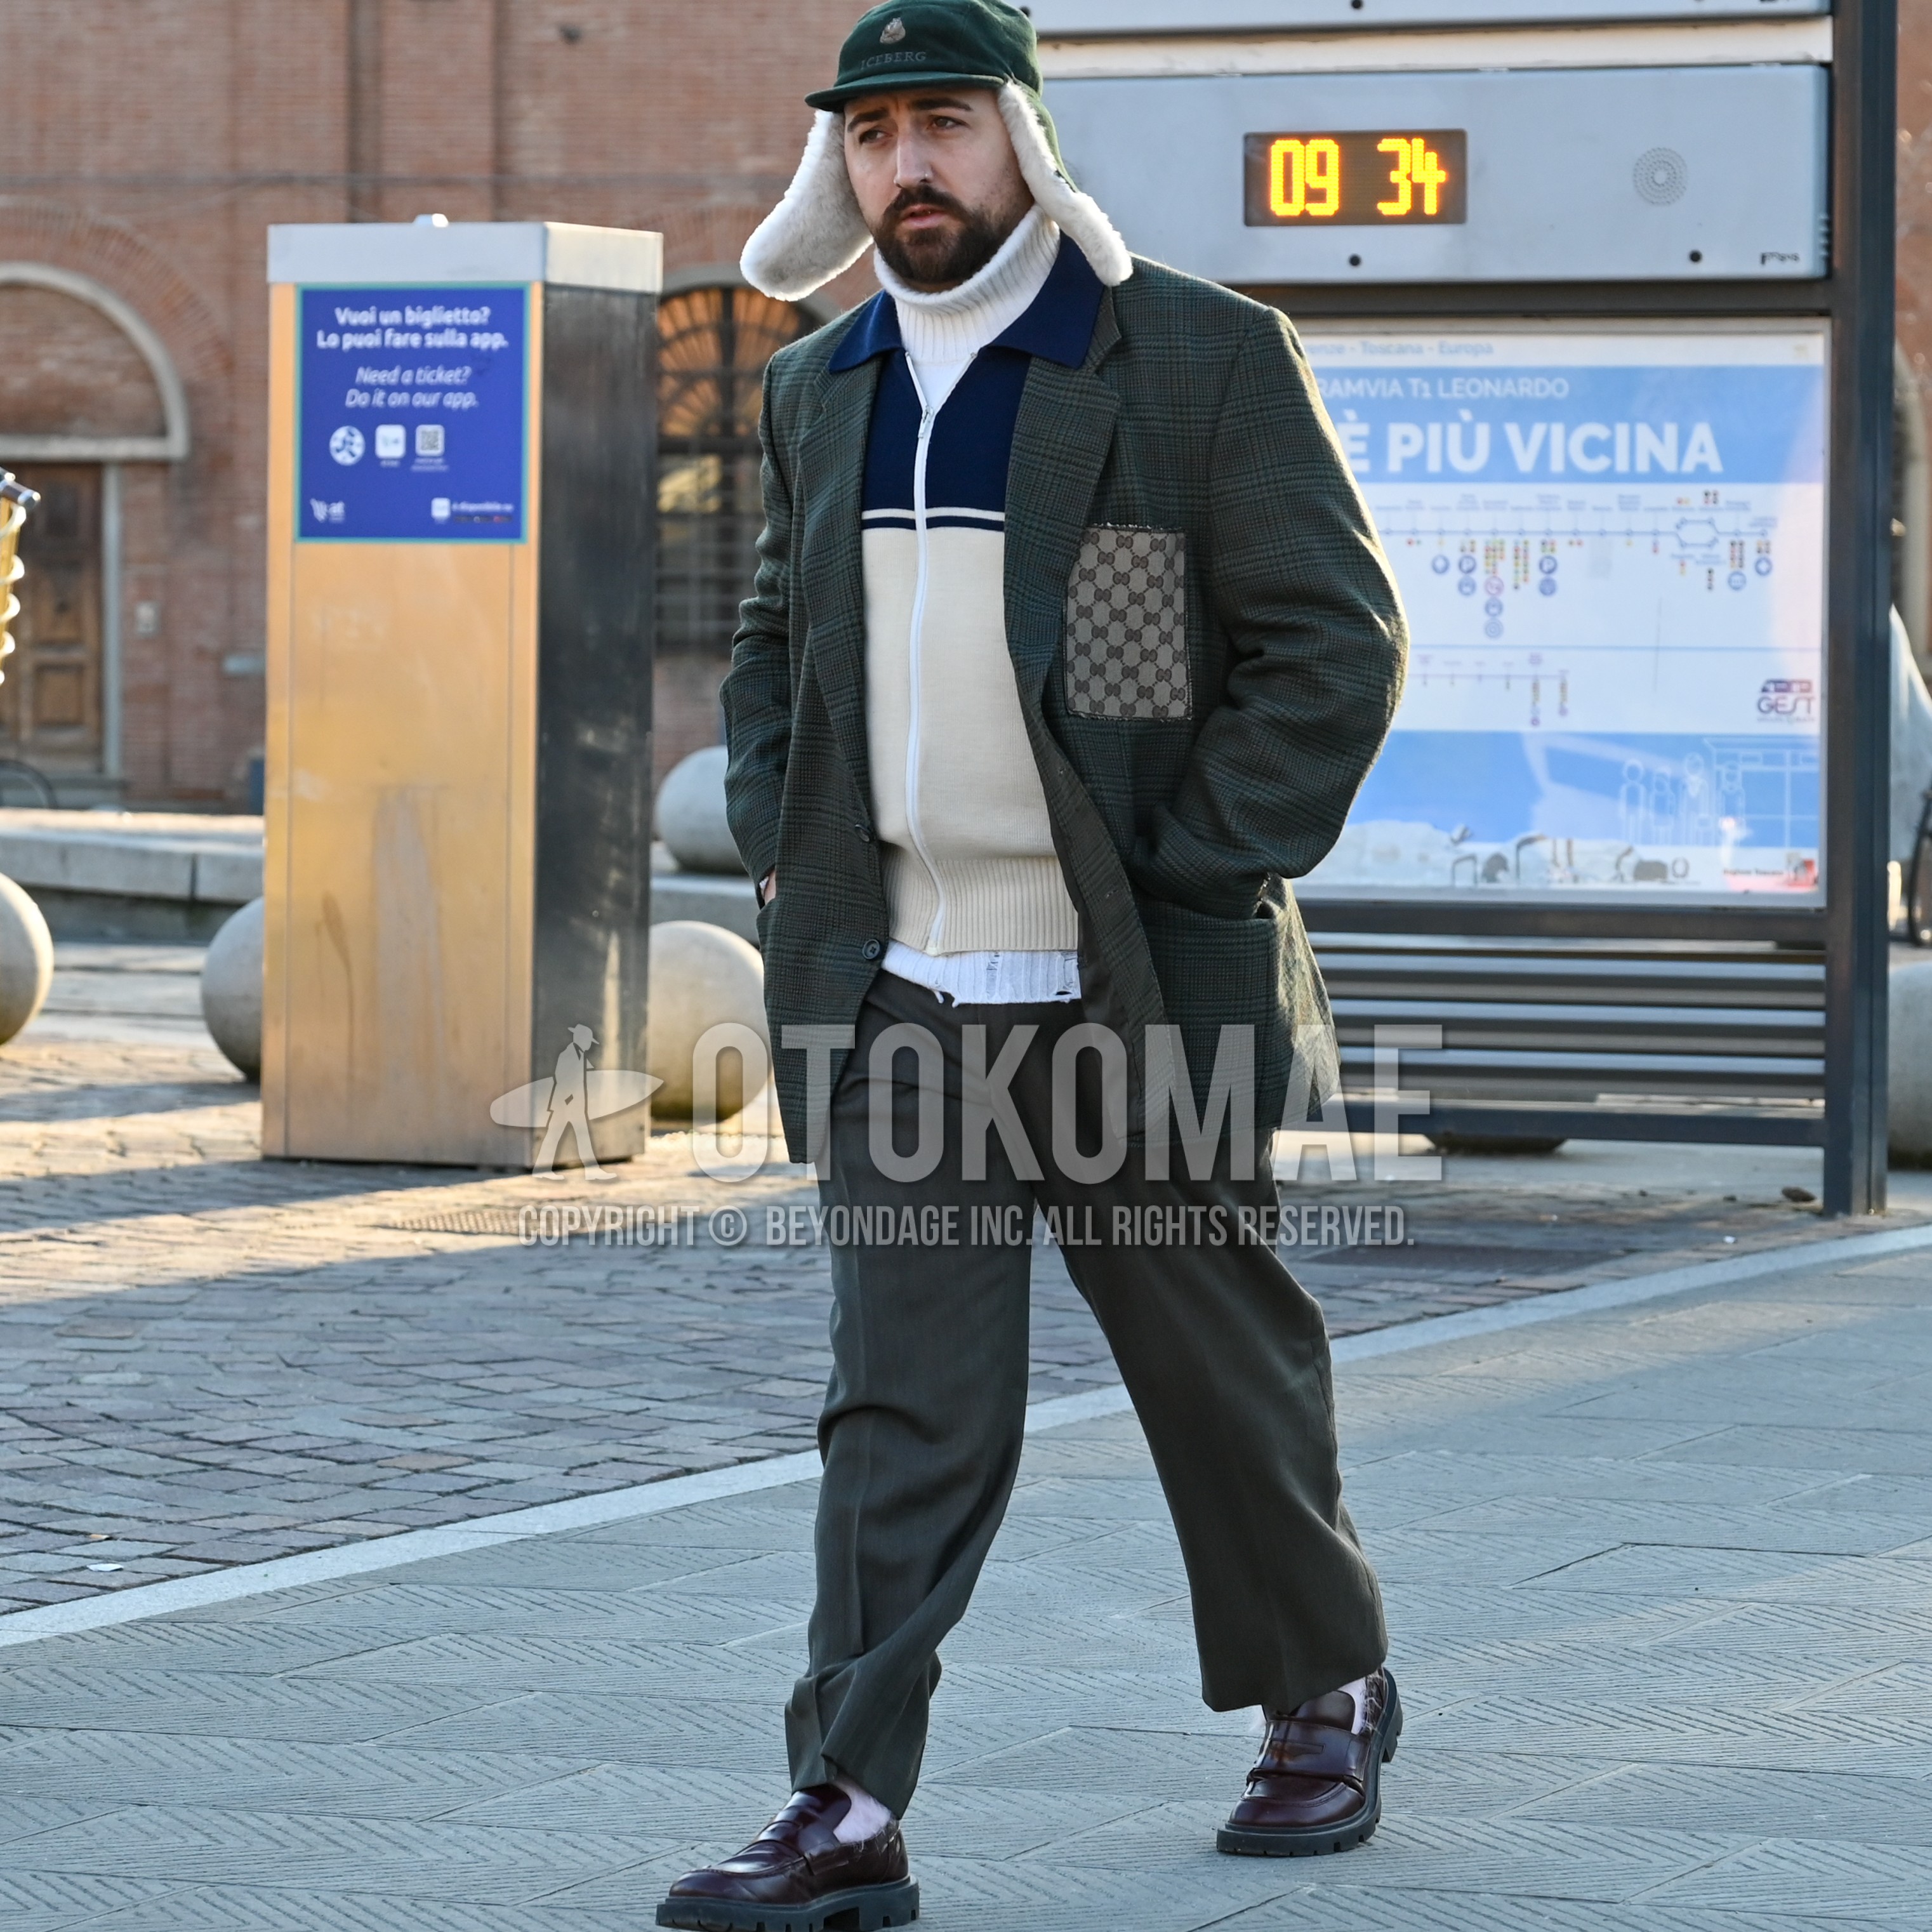 Men's autumn winter outfit with olive green one point jet cap, dark gray check tailored jacket, navy white tops/innerwear cardigan, white plain turtleneck knit, dark gray plain slacks, white plain socks, brown coin loafers leather shoes.